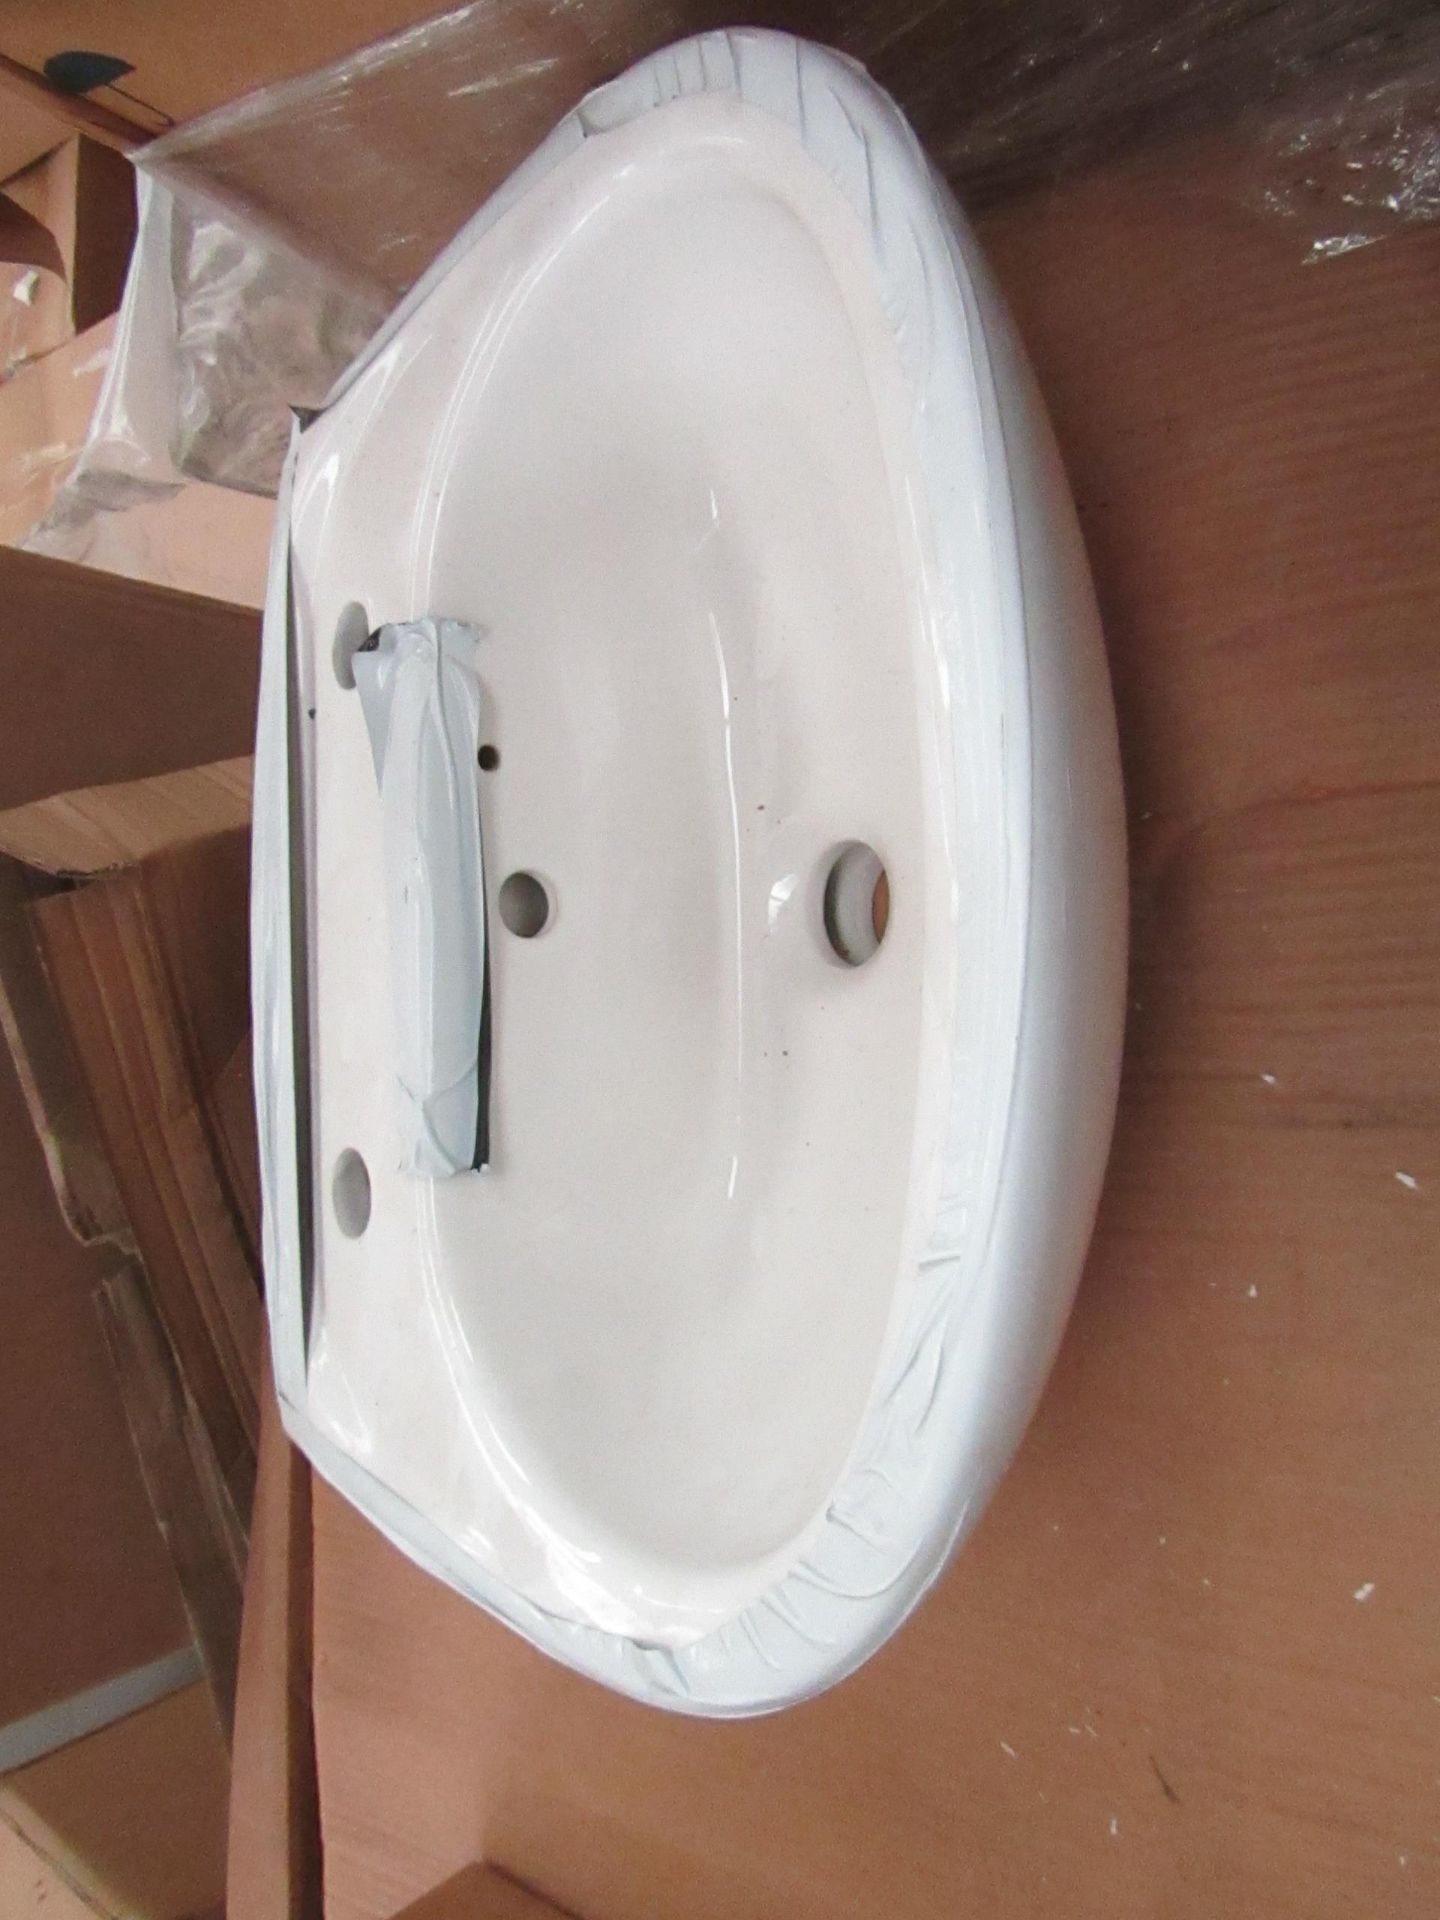 2x Oxford 2TH cloakroom basin, new and boxed.